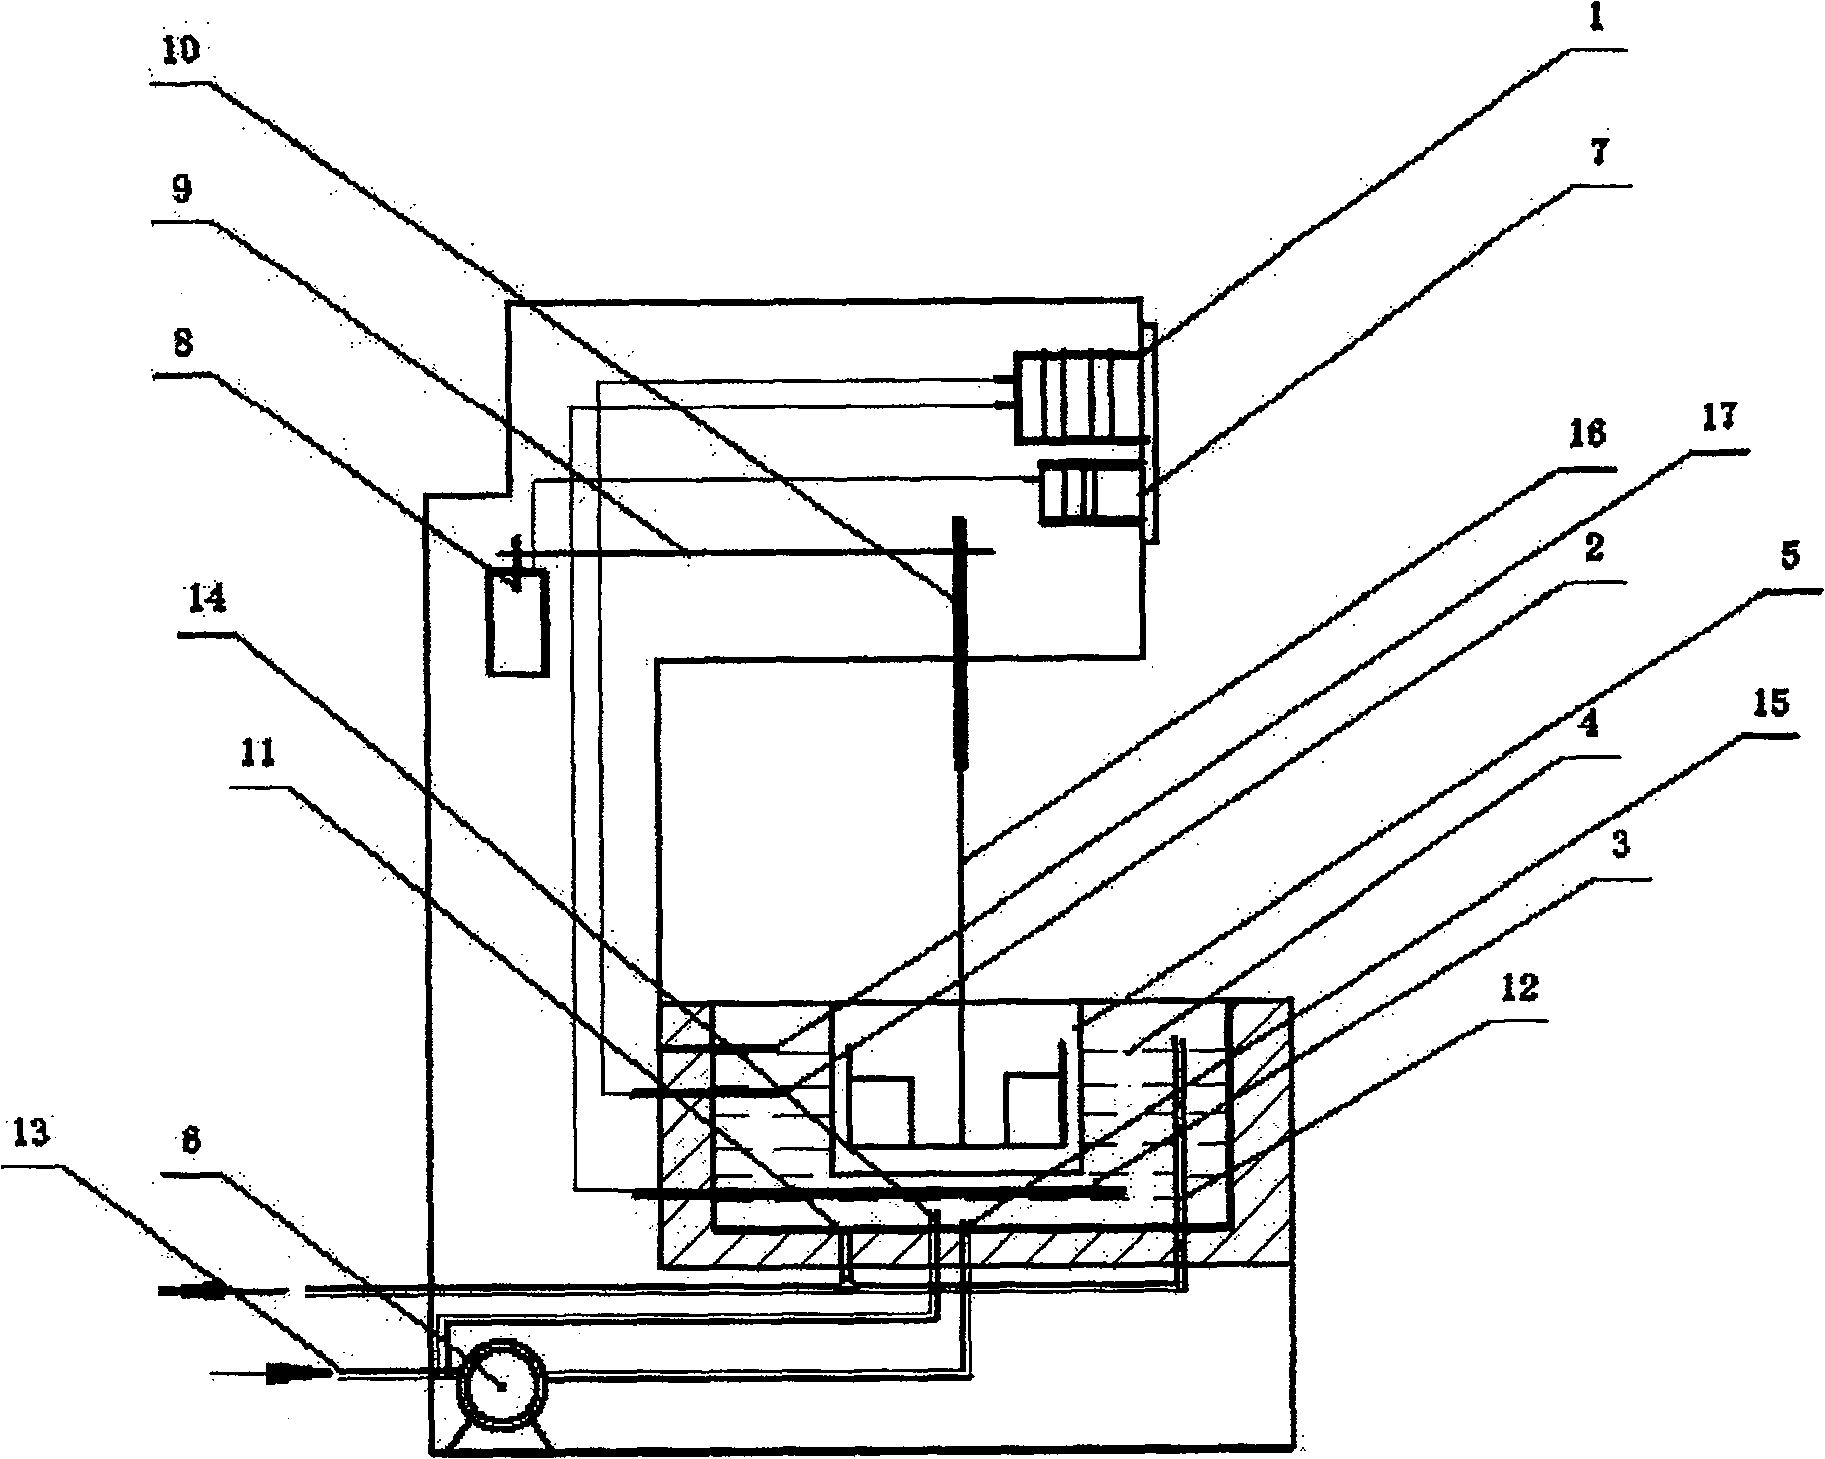 Apparatus for making dry cheese